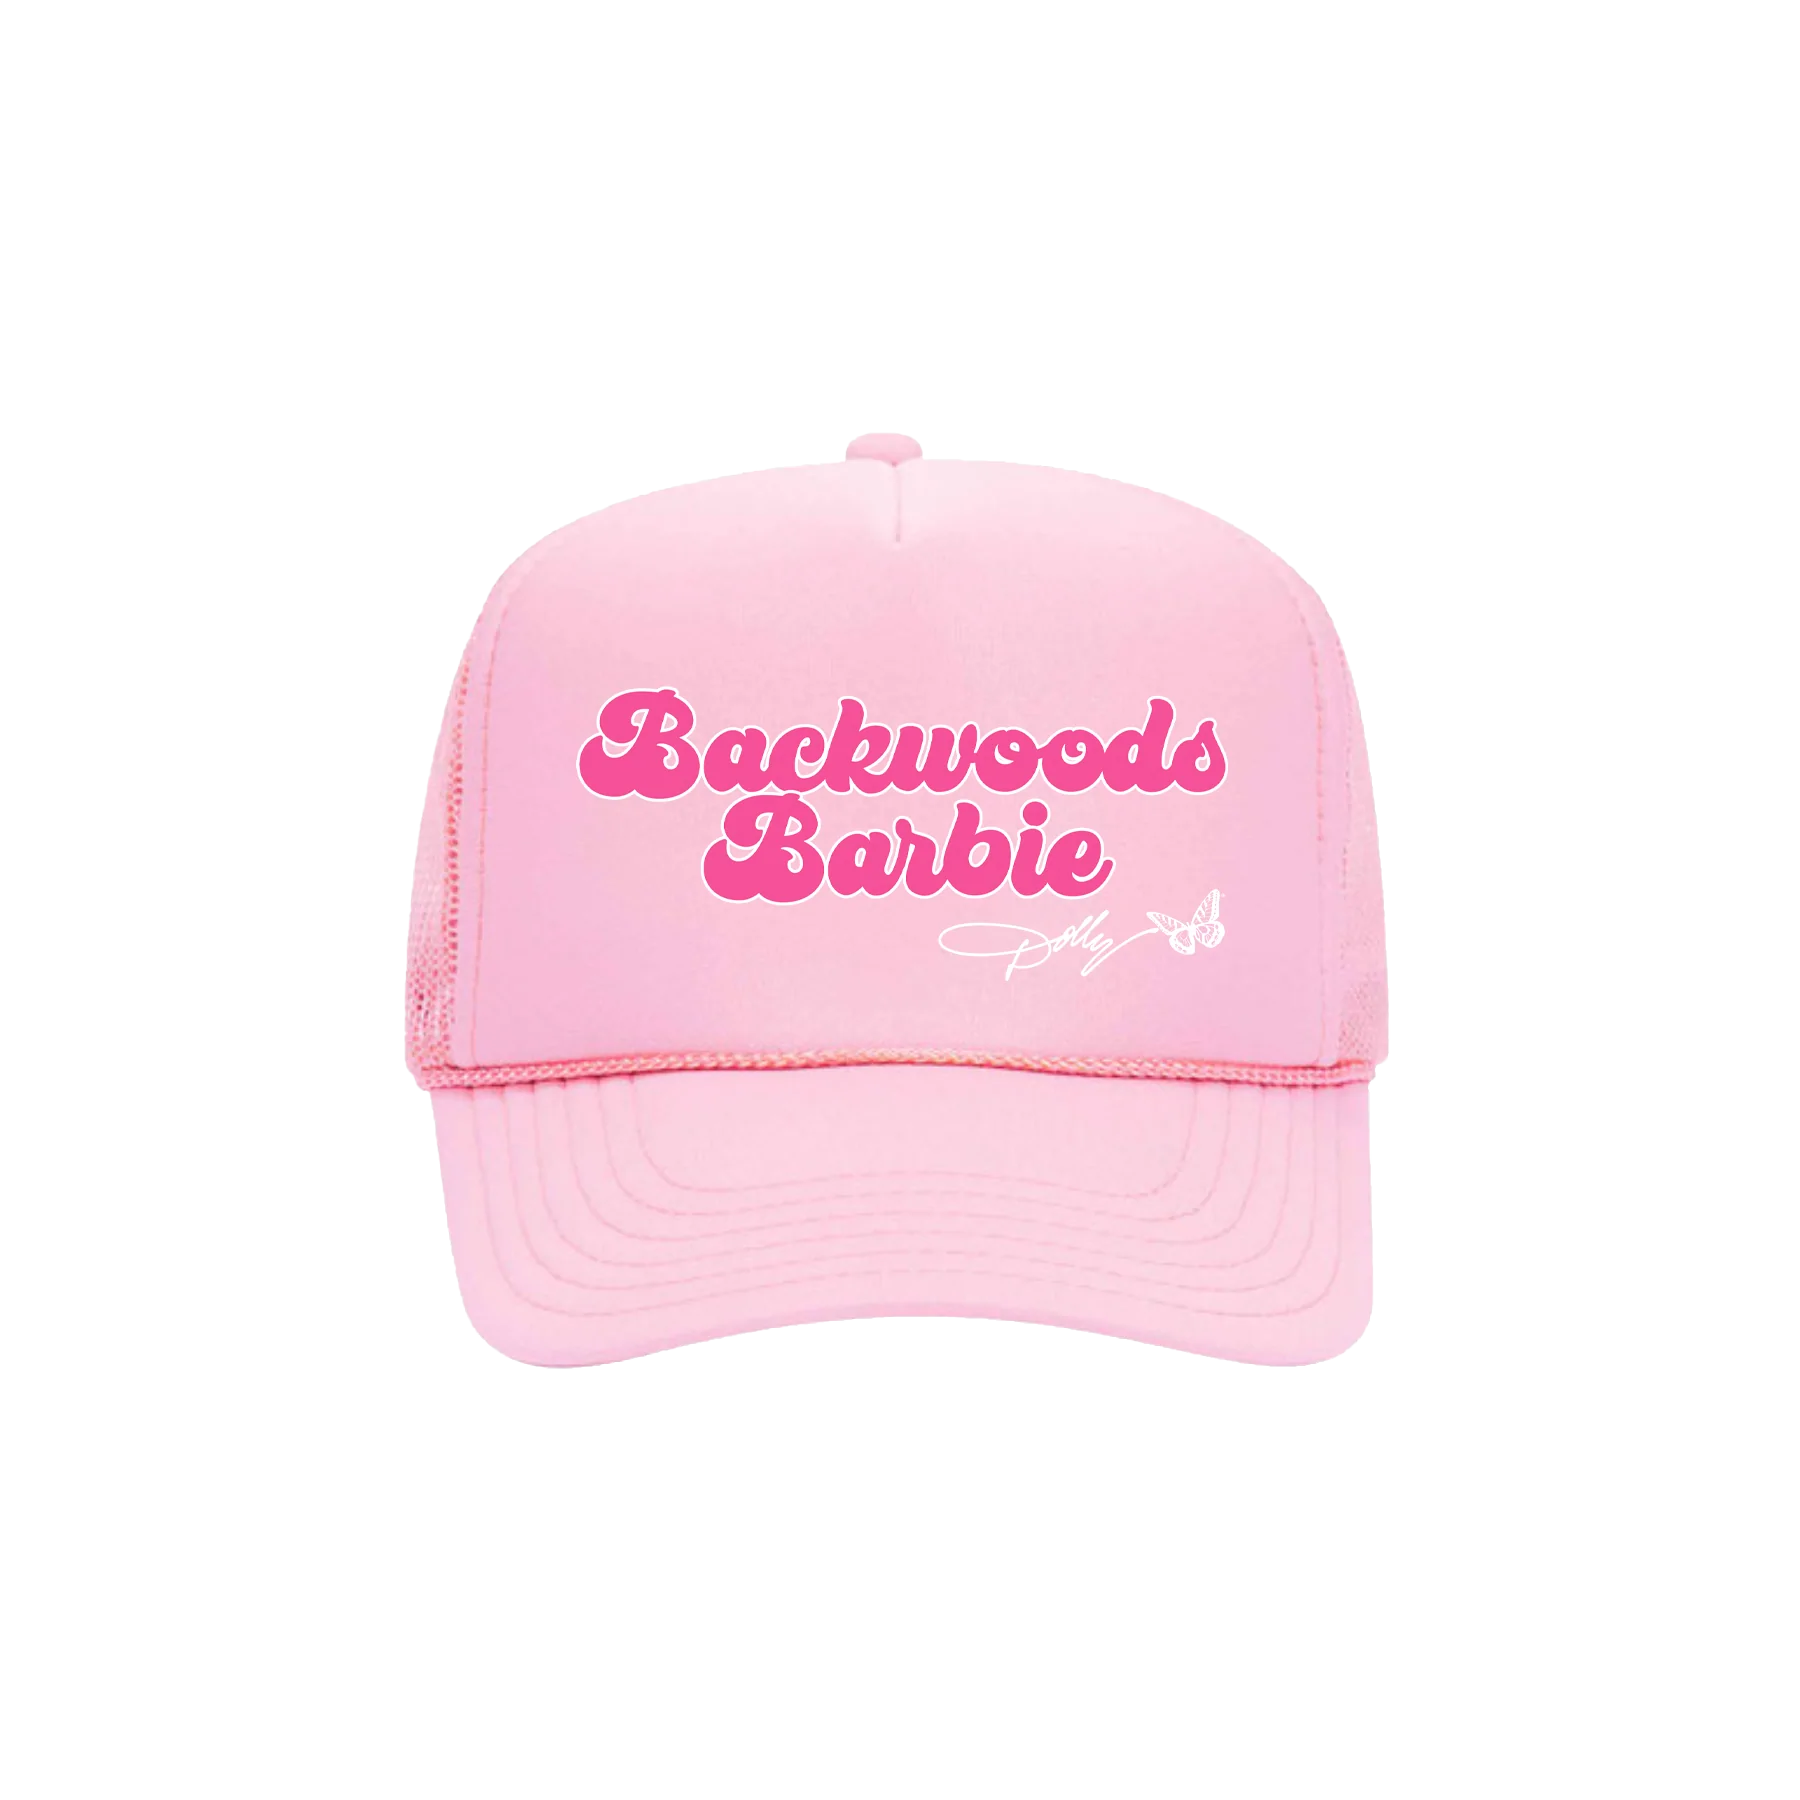 Official Dolly Parton Merchandise. 100% polyester pink trucker hat with mesh back and plastic adjustable snap. Backwoods Barbies and the iconic Dolly Parton butterfly logo printed on the front in dark pink.